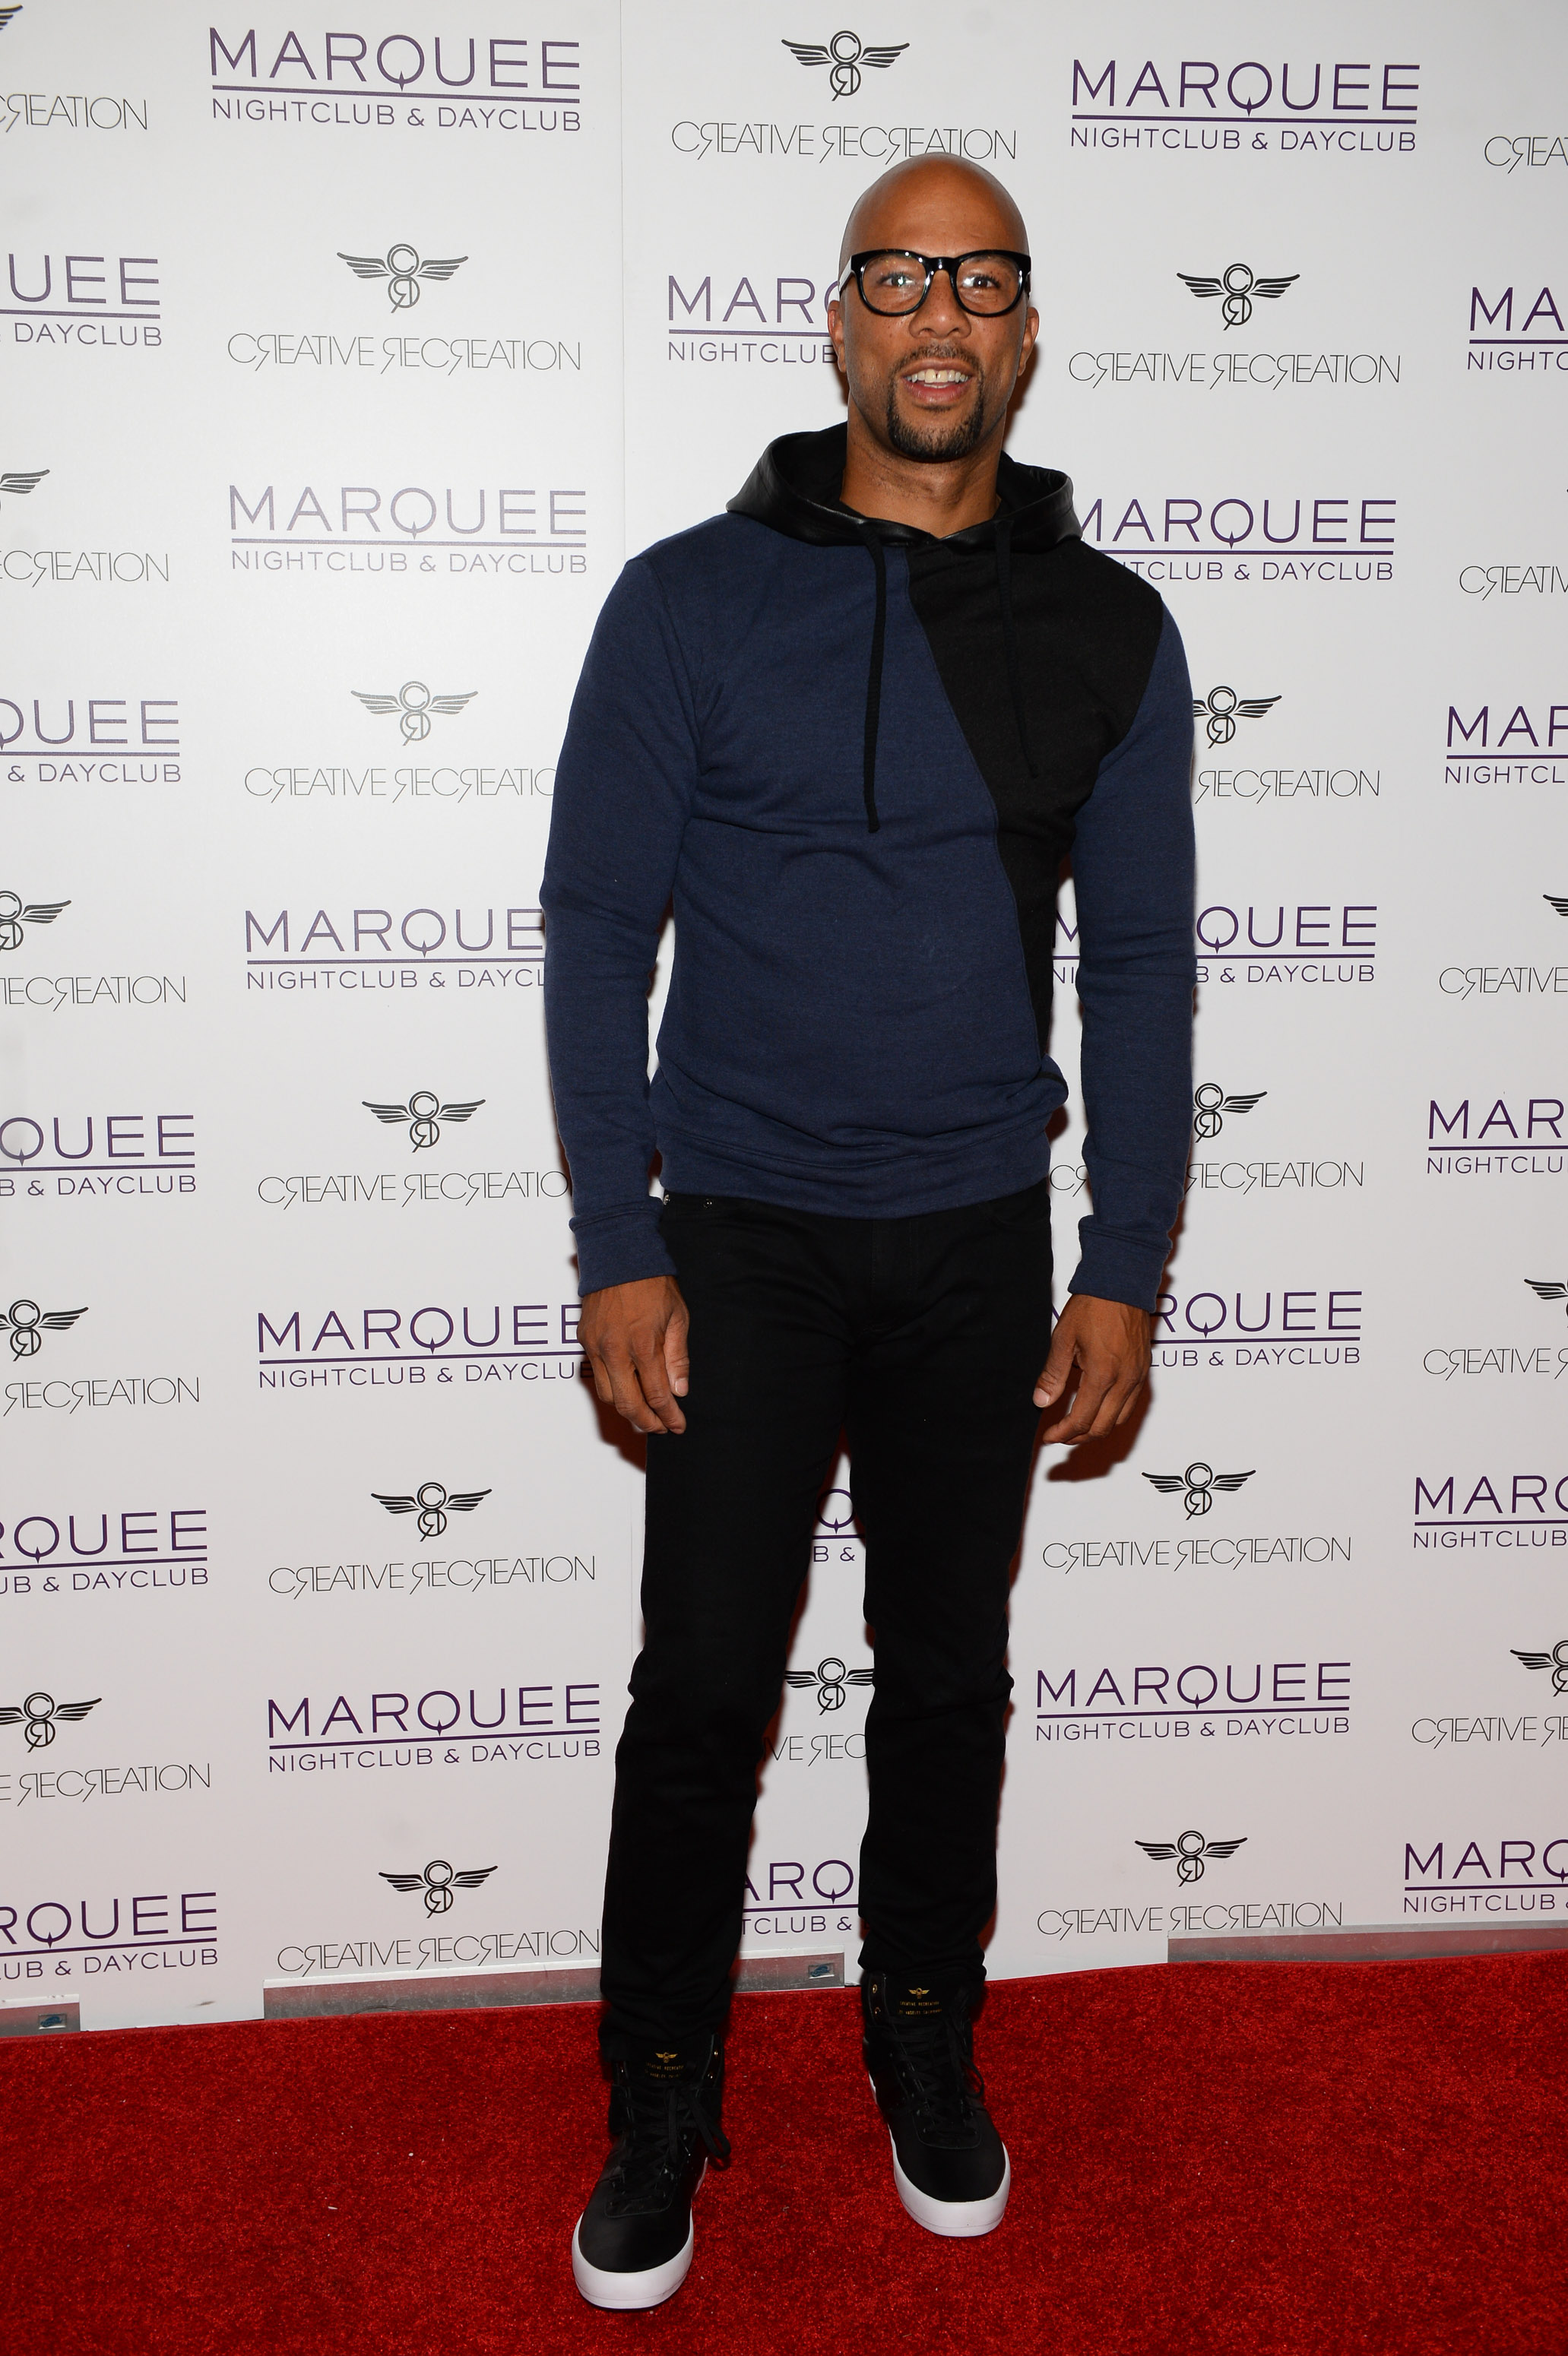 Common at Marquee, photo by Al Powers/PowersImagery